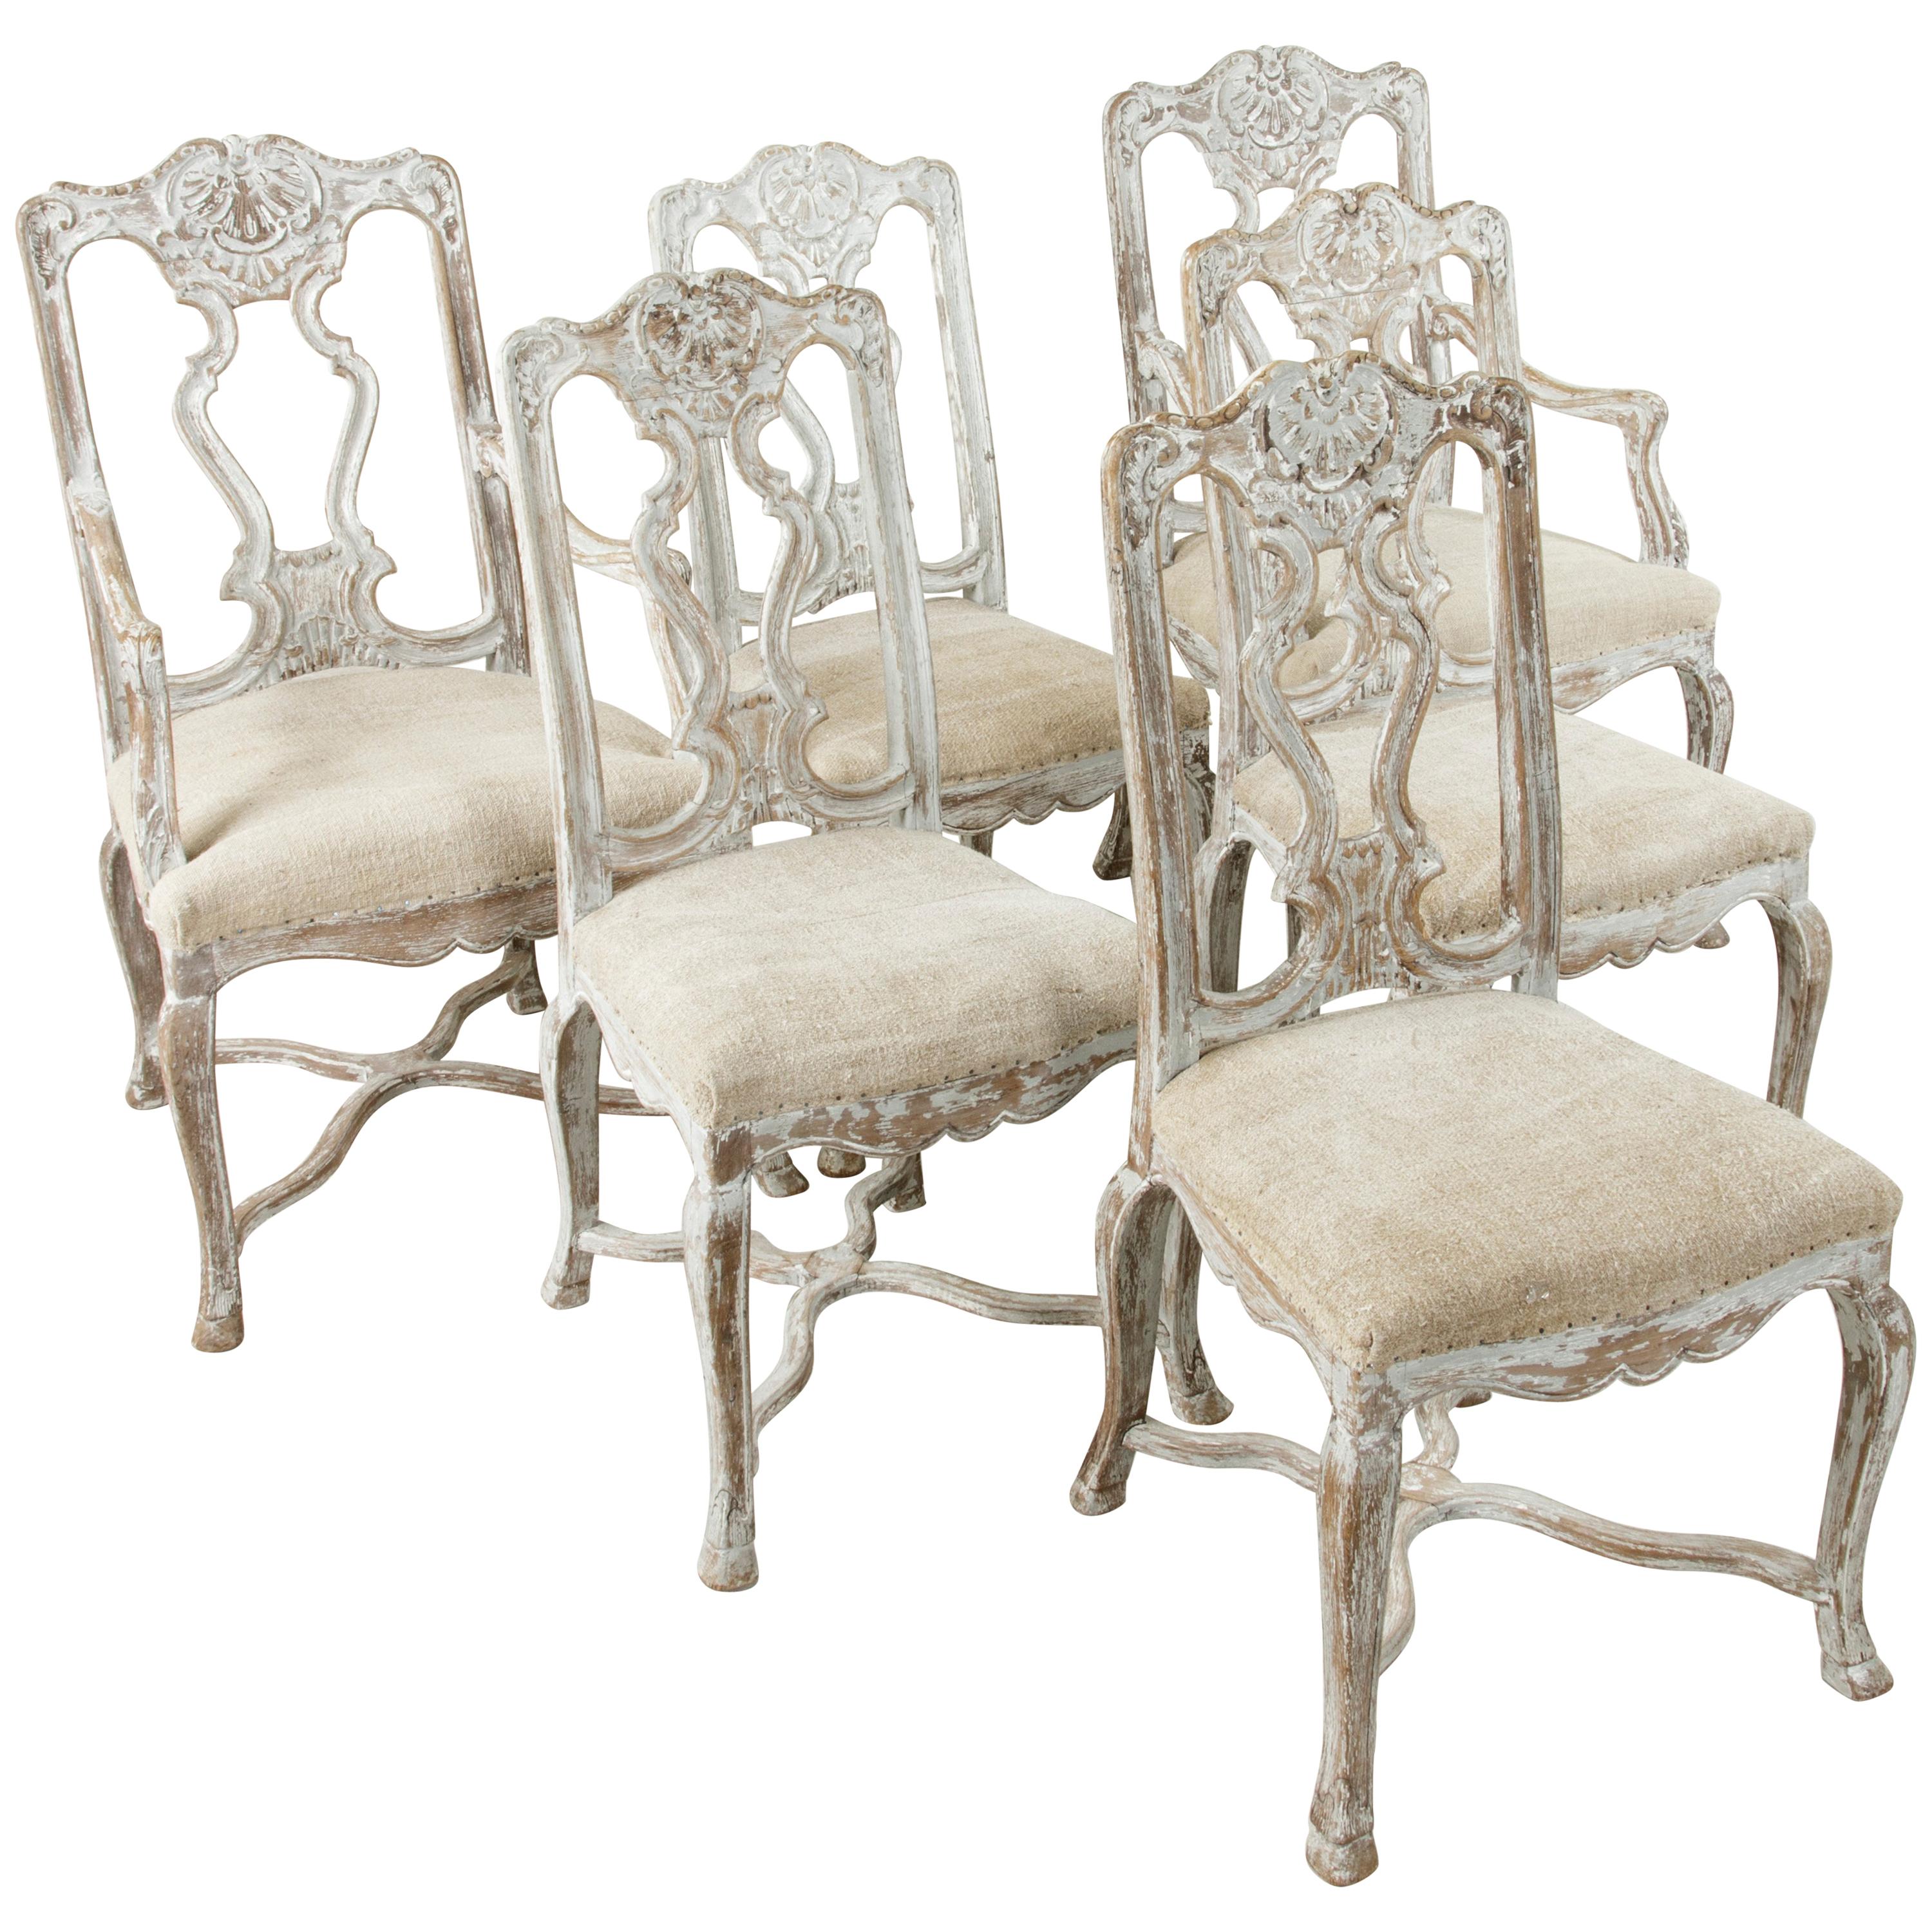 Set of Six Late 19th Century French Regency Style Hand-Carved Oak Dining Chairs